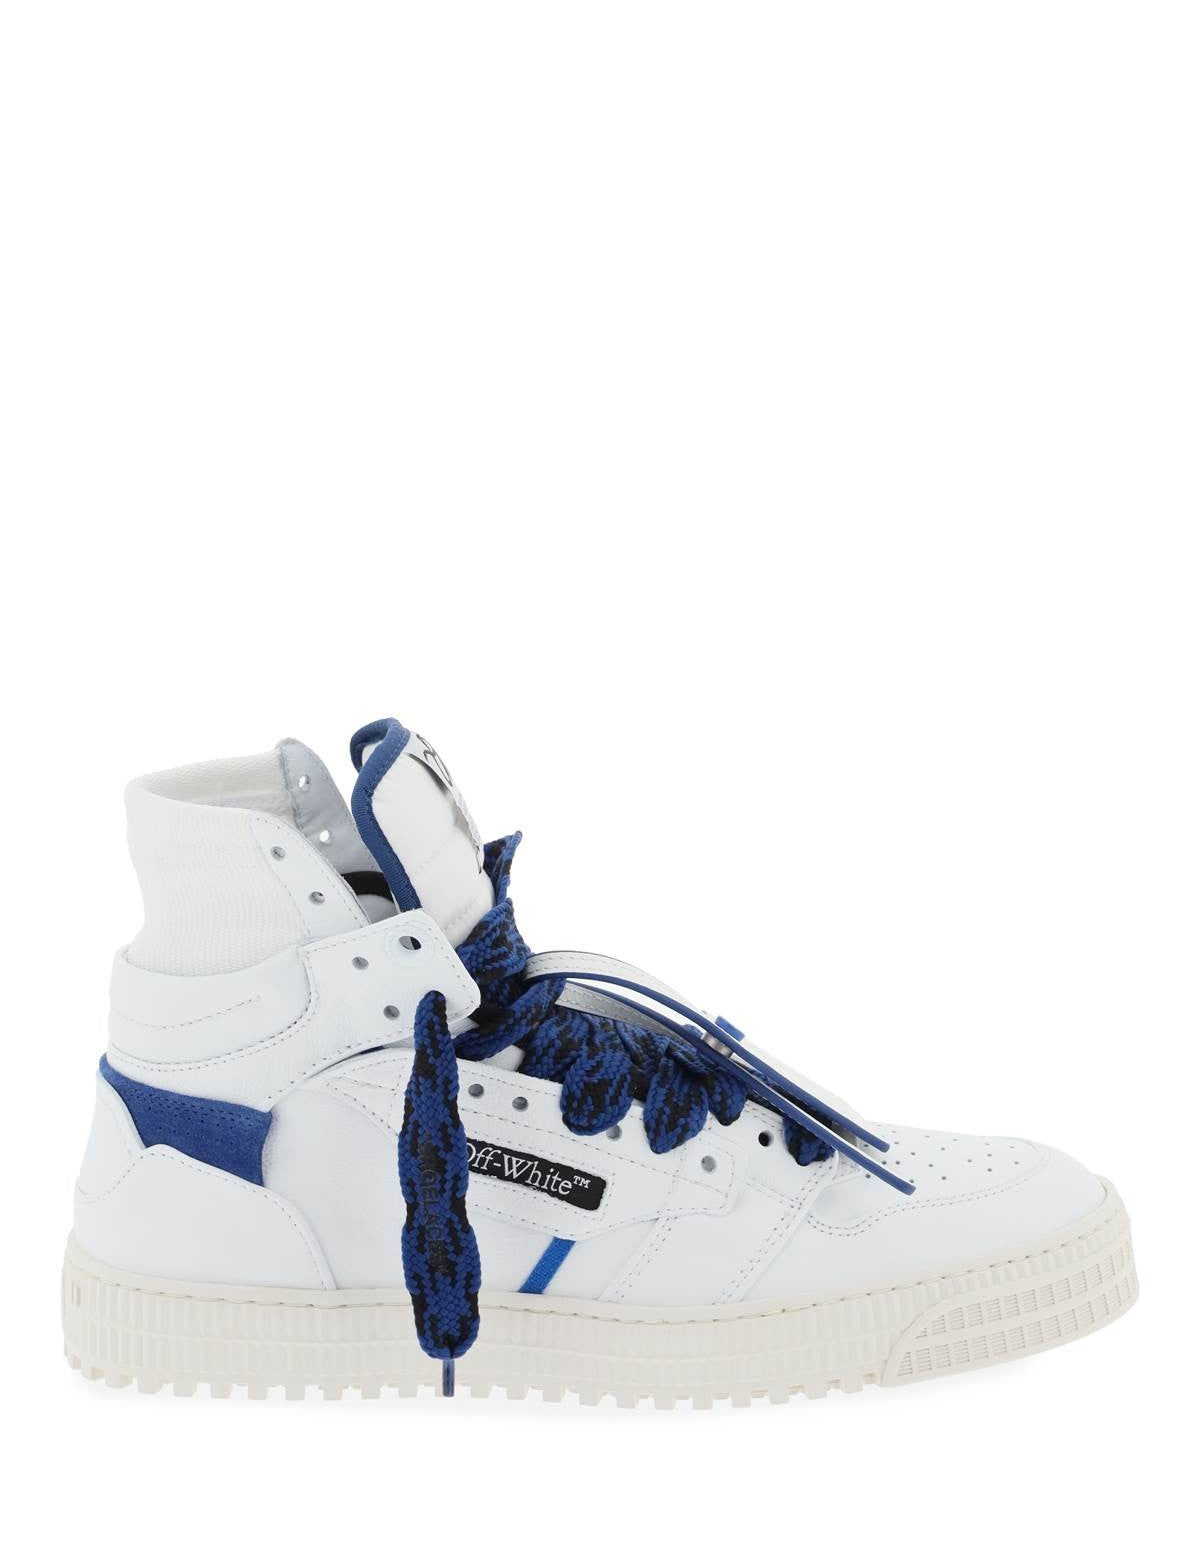 off-white-30-off-court-sneakers.jpg